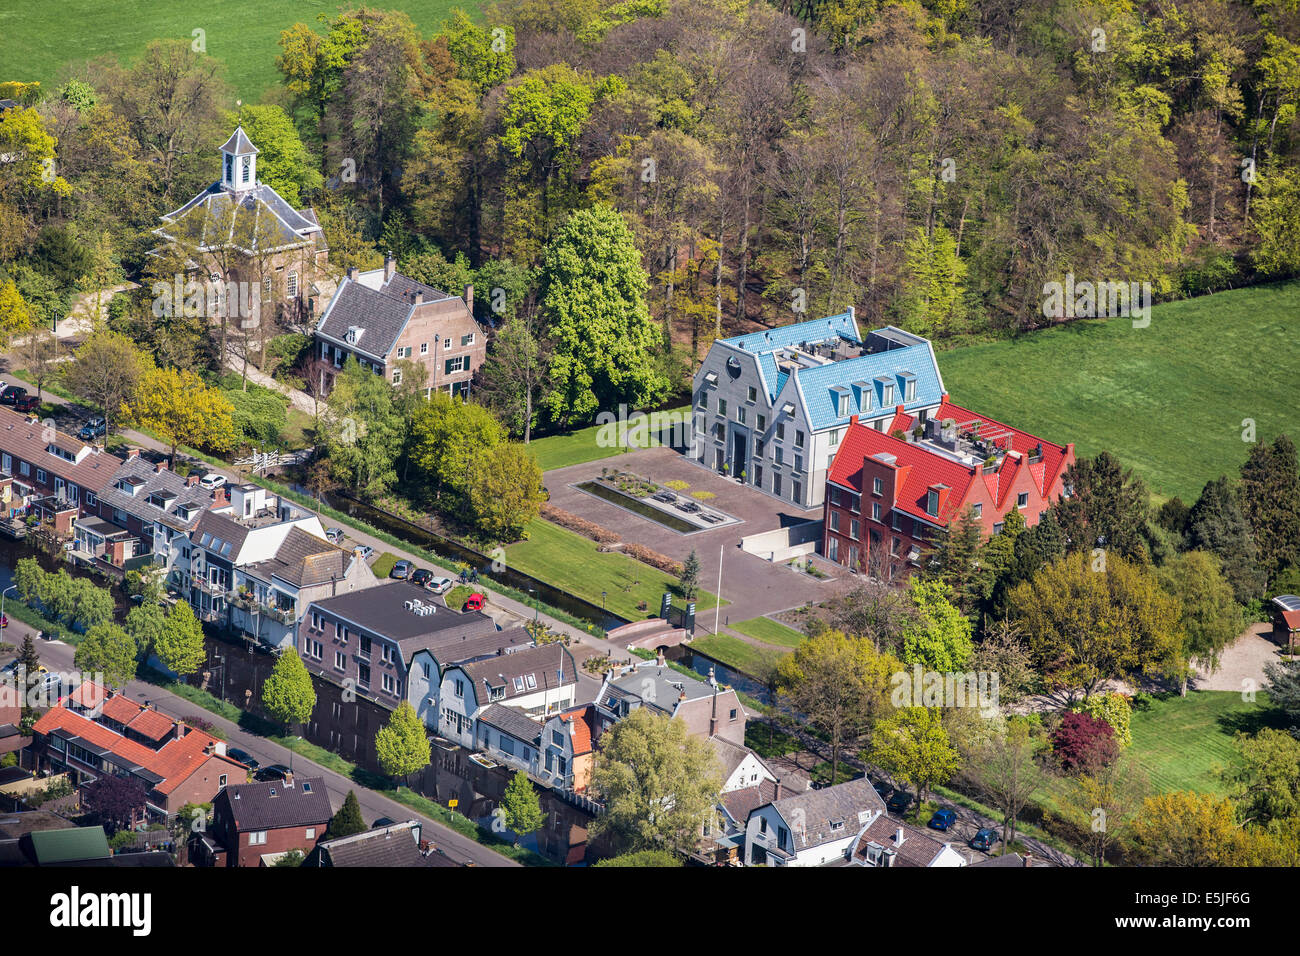 Netherlands, 's-Graveland, Right modern rural estate called Castor and Pollux. Left Dutch Reformed Church from 1658. Aerial Stock Photo